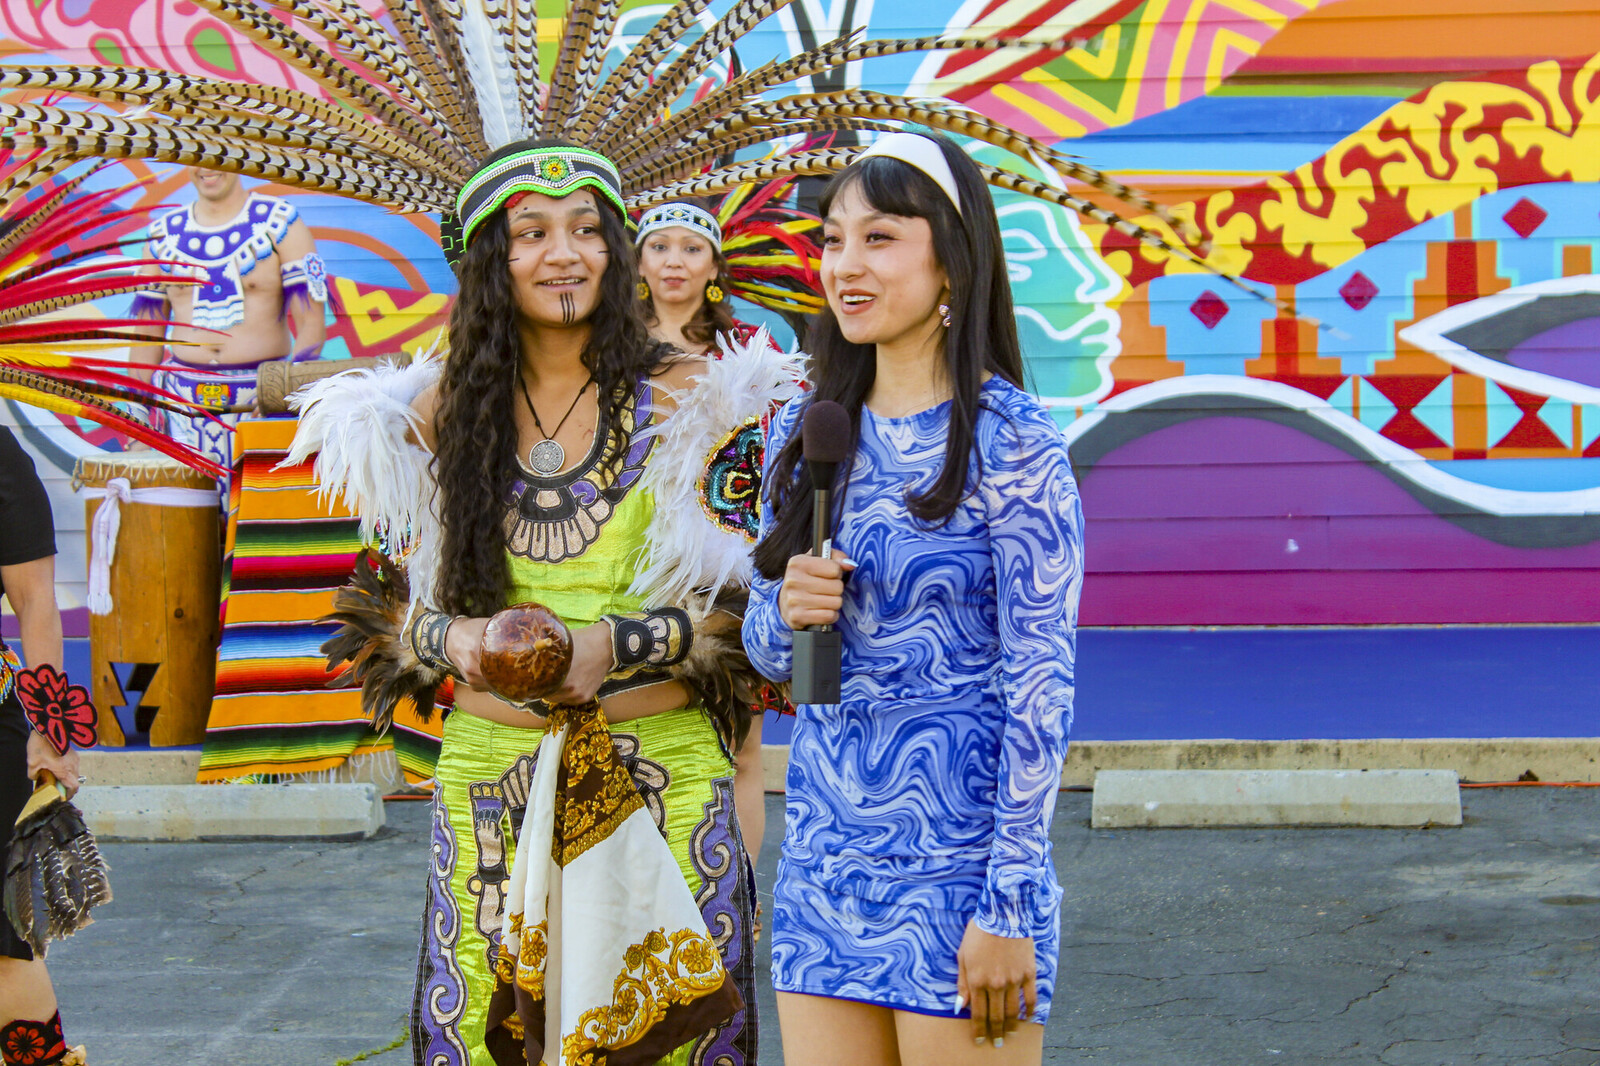 An artist speaking at a mural unveiling with dancers in indigenous costumes